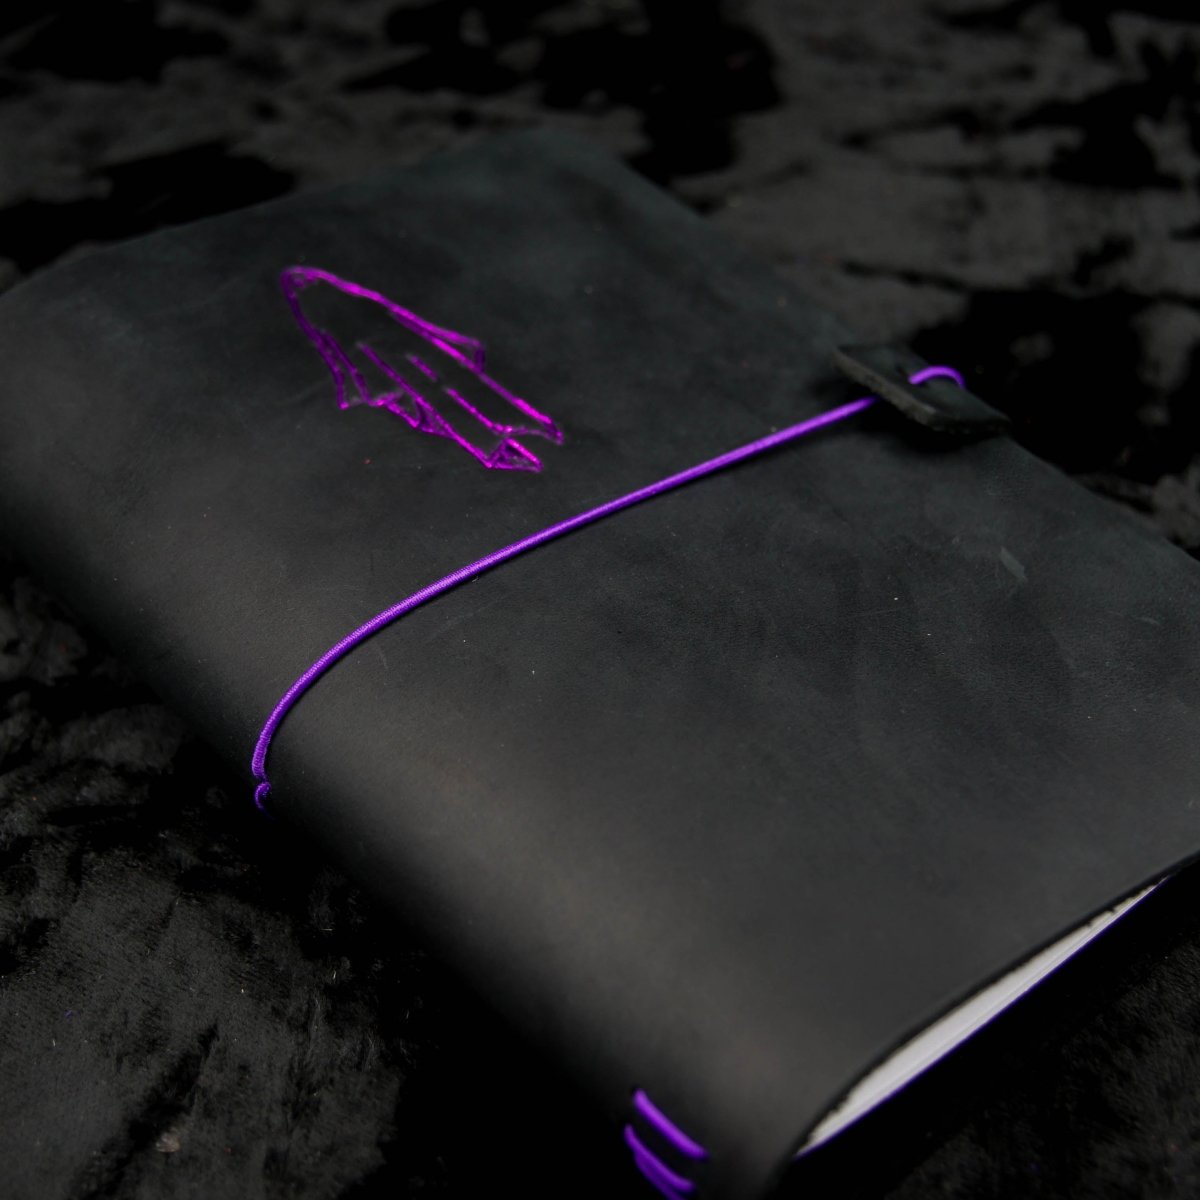 Ghost Leather Traveler's Notebook - Gothic Journal - The Gothic Stationery Company - Notebooks